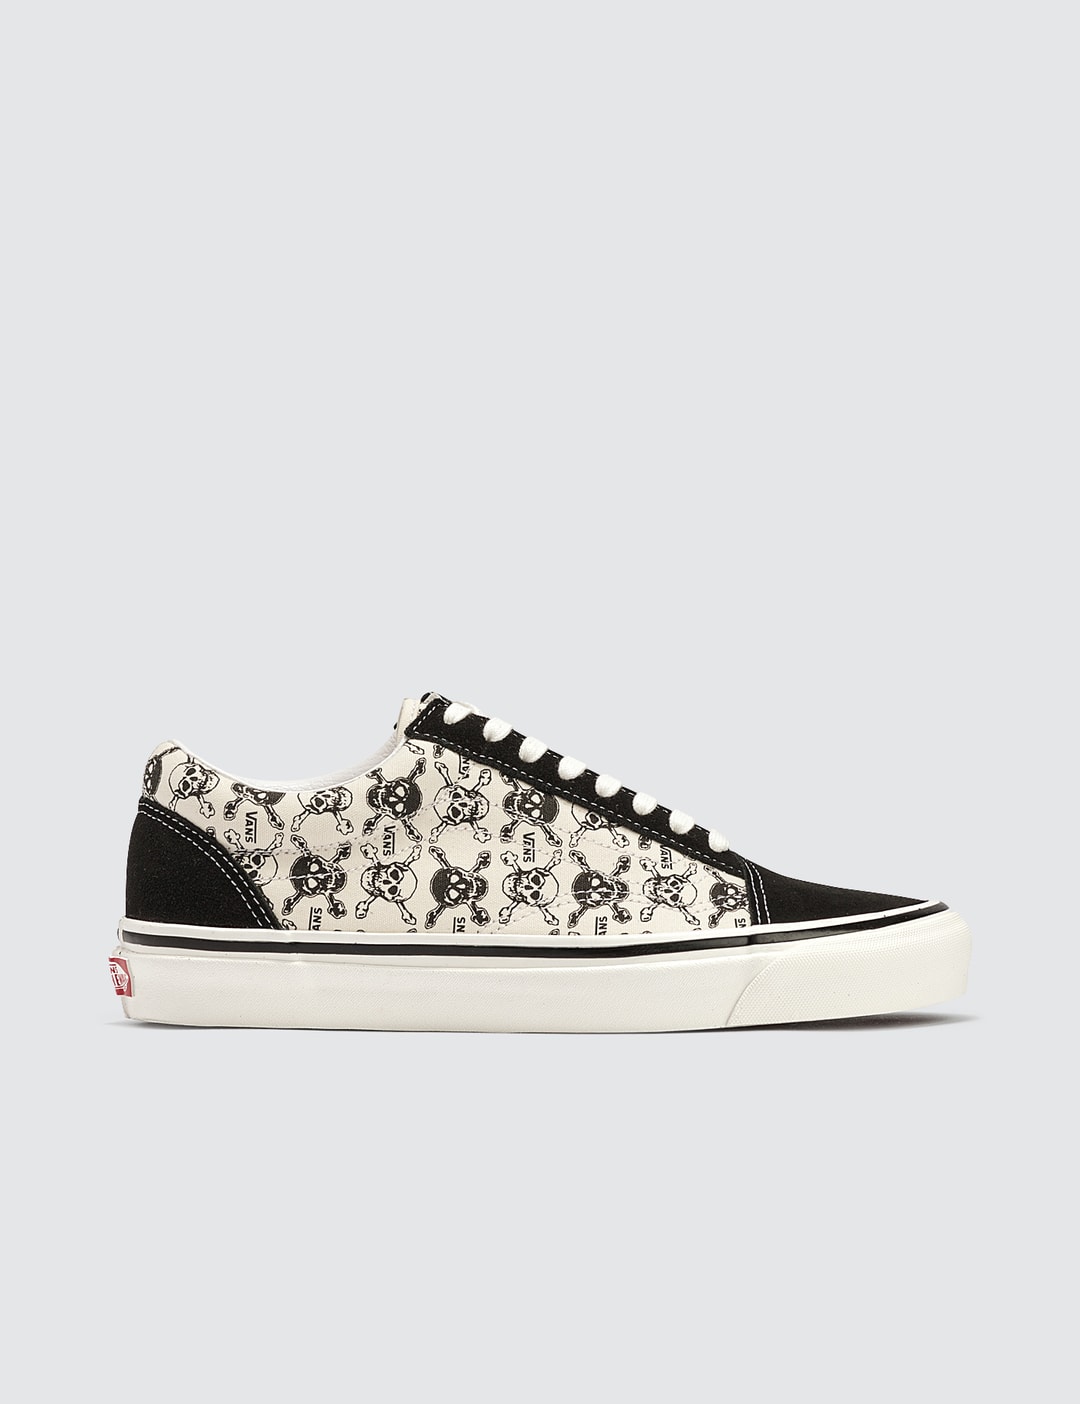 Vans - Old Skool 36 DX | HBX - Globally Curated Fashion and Lifestyle ...